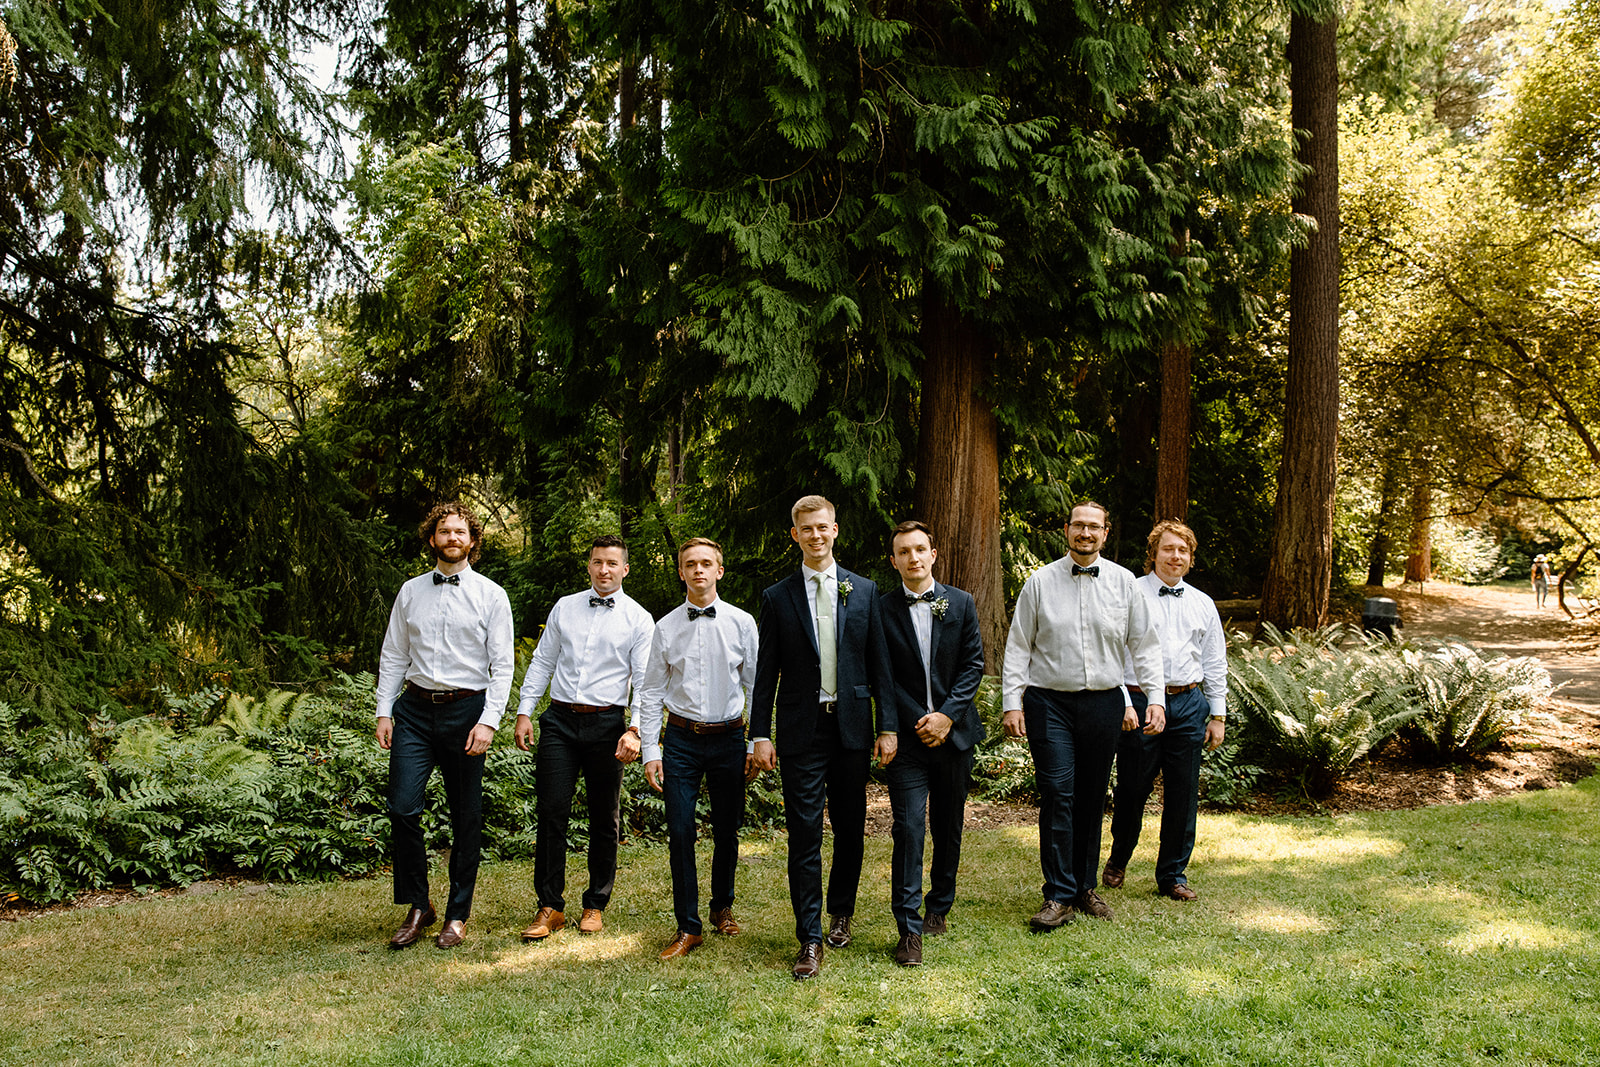 A beautiful garden Seattle Washington wedding with timeless black and white florals and colors.